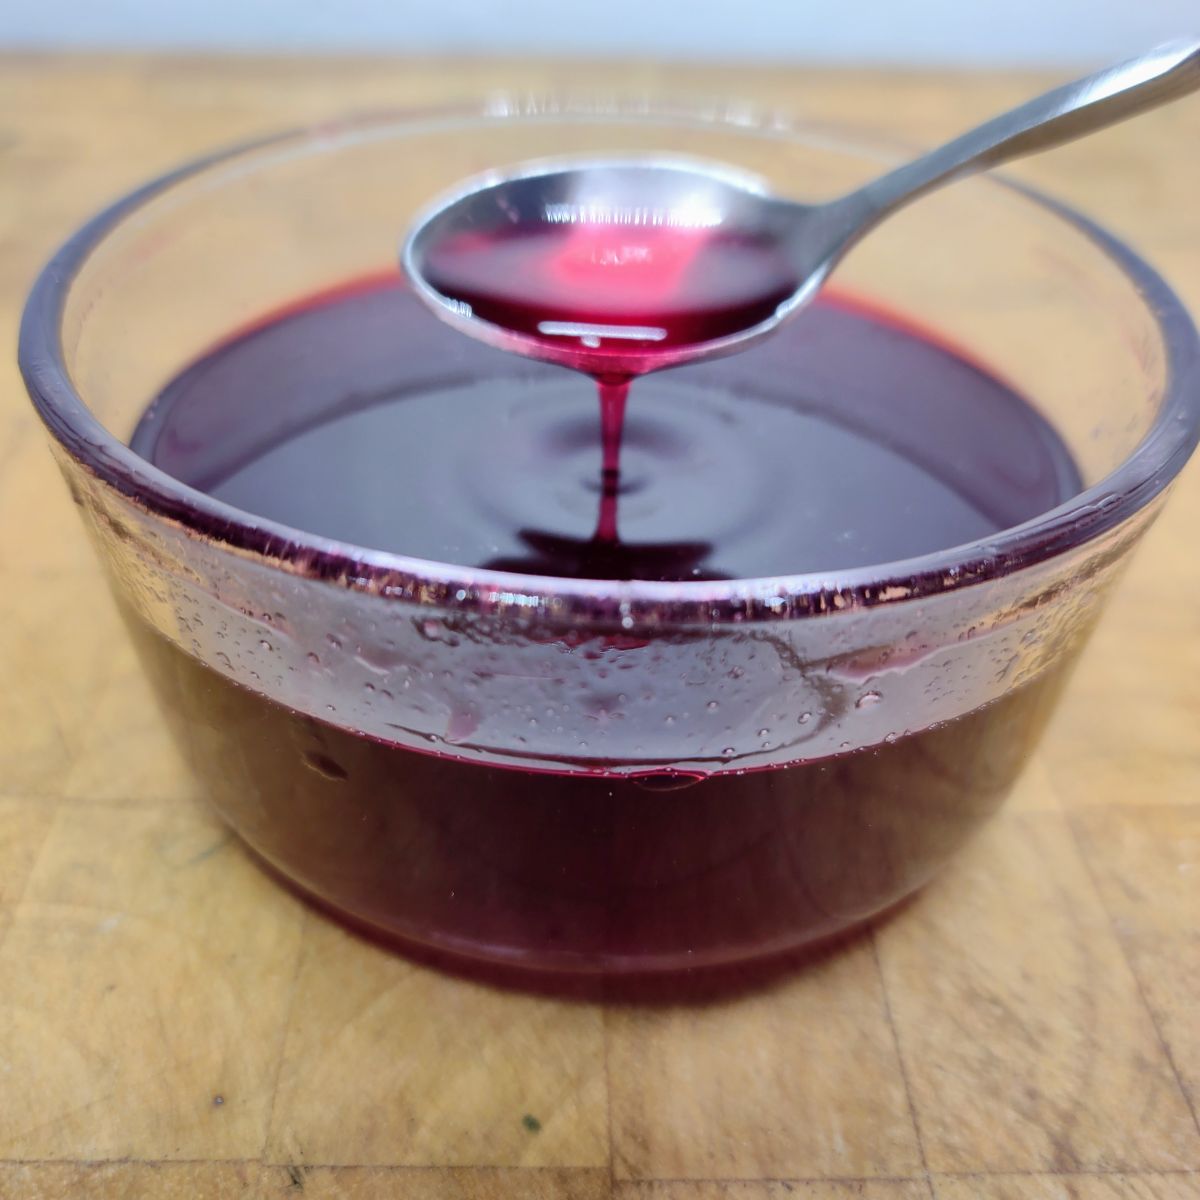 Blackberry simple syrup being scooped by a spoon.